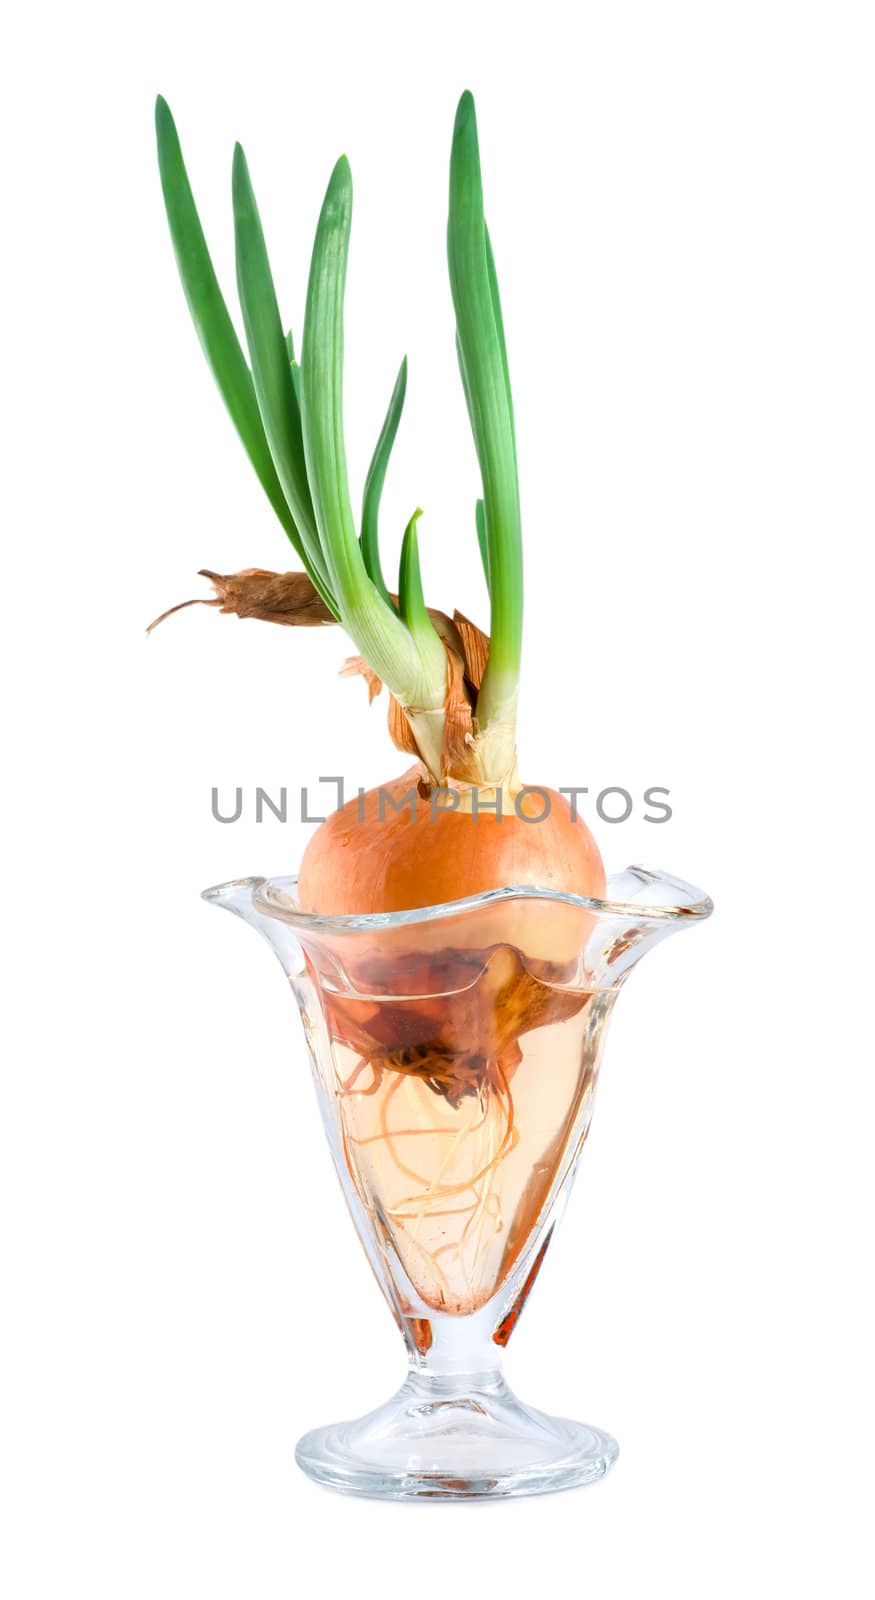 Onions in a glass vase by Givaga